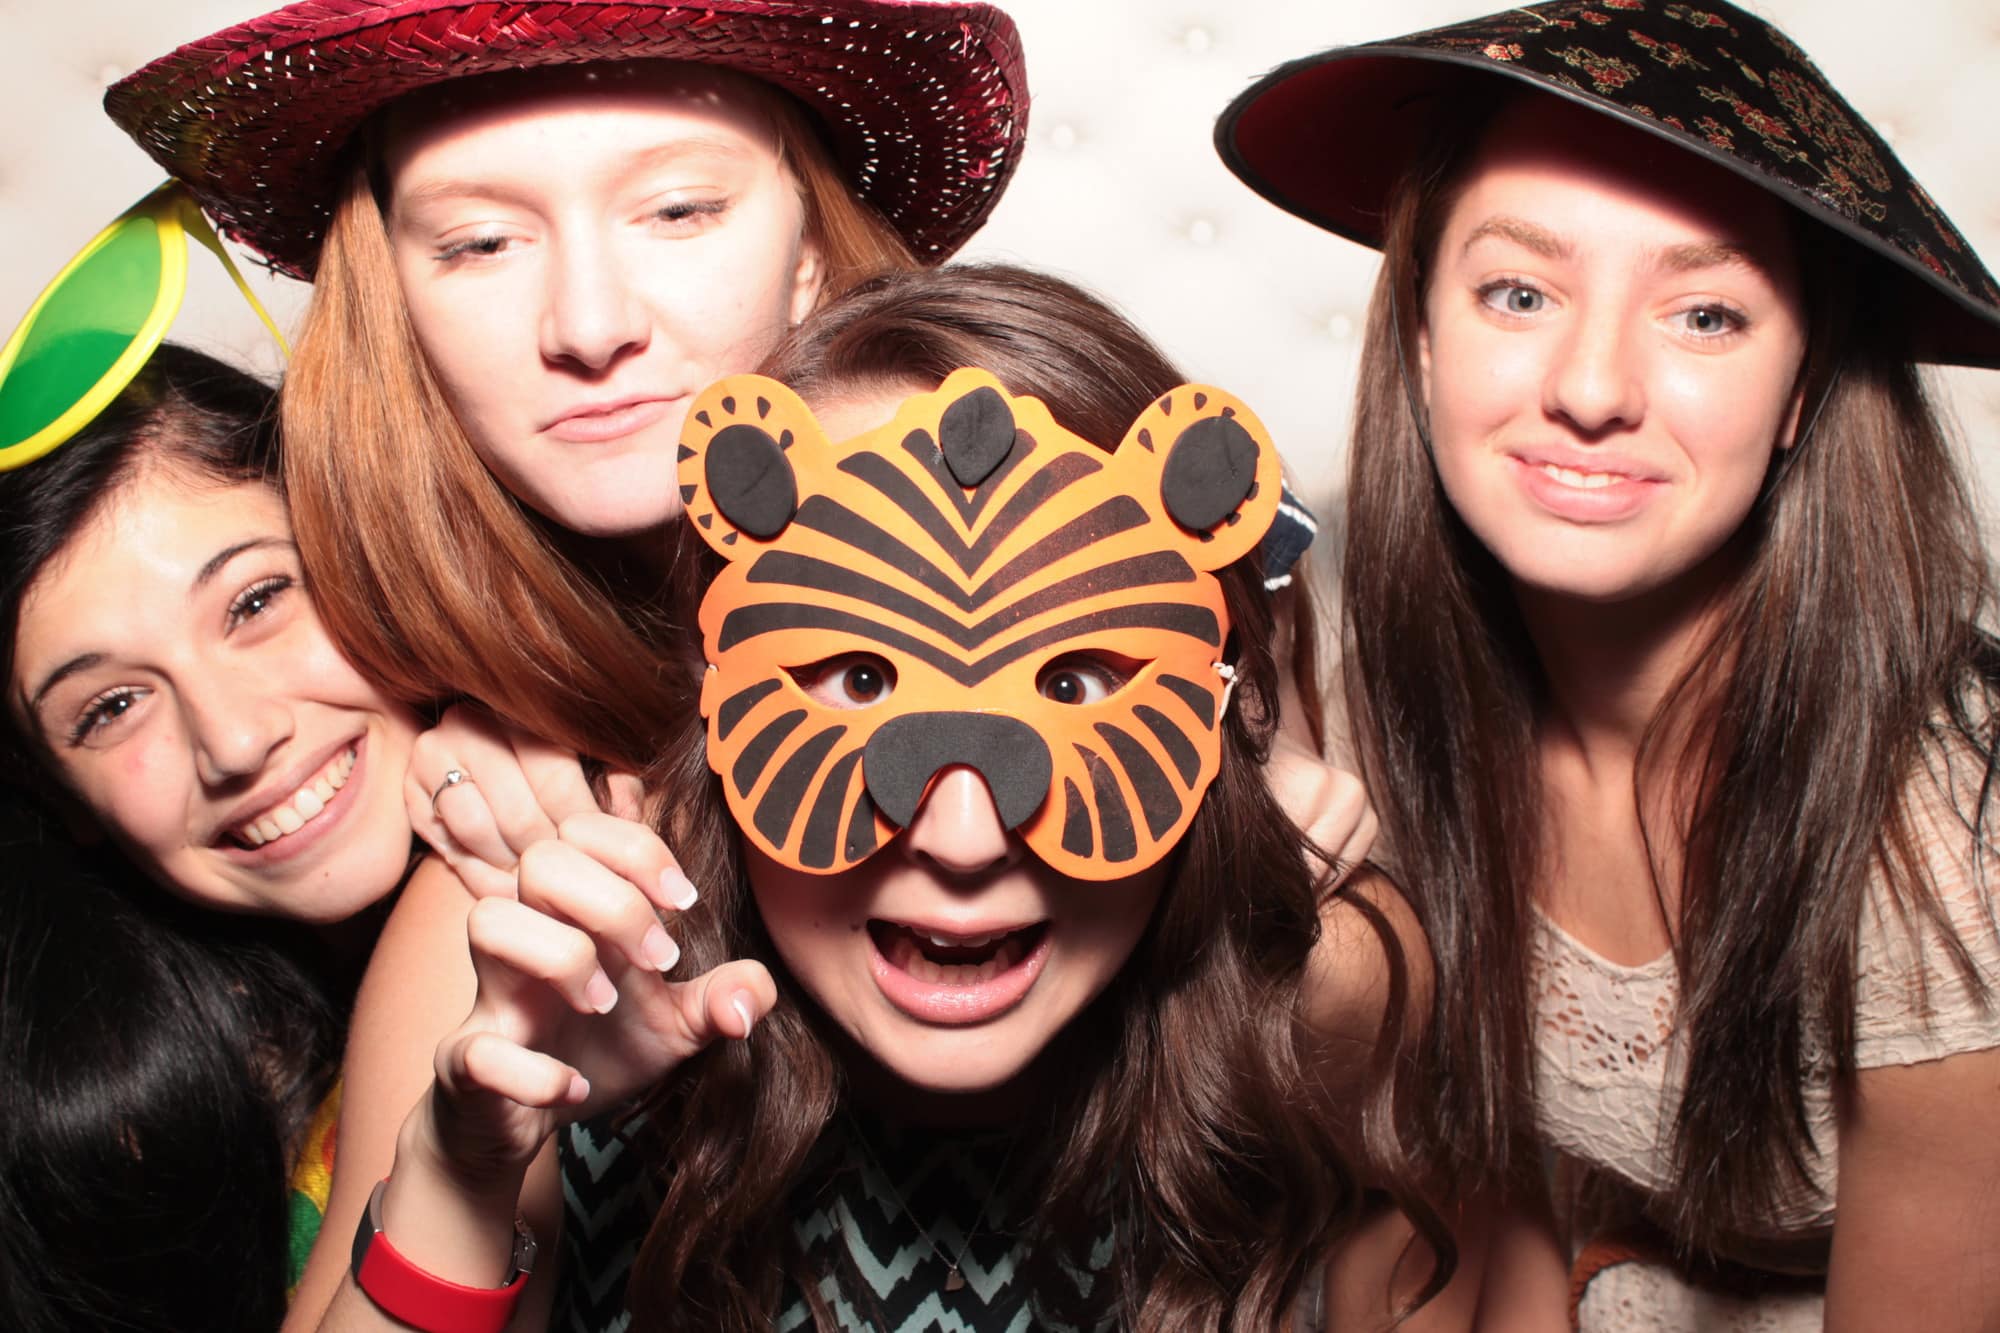 Photo Booth-Rental-No.1-Austin-County Line BBQ-Sweet-Sixteen-Birthday-Teens-Memories-Awesome-Props